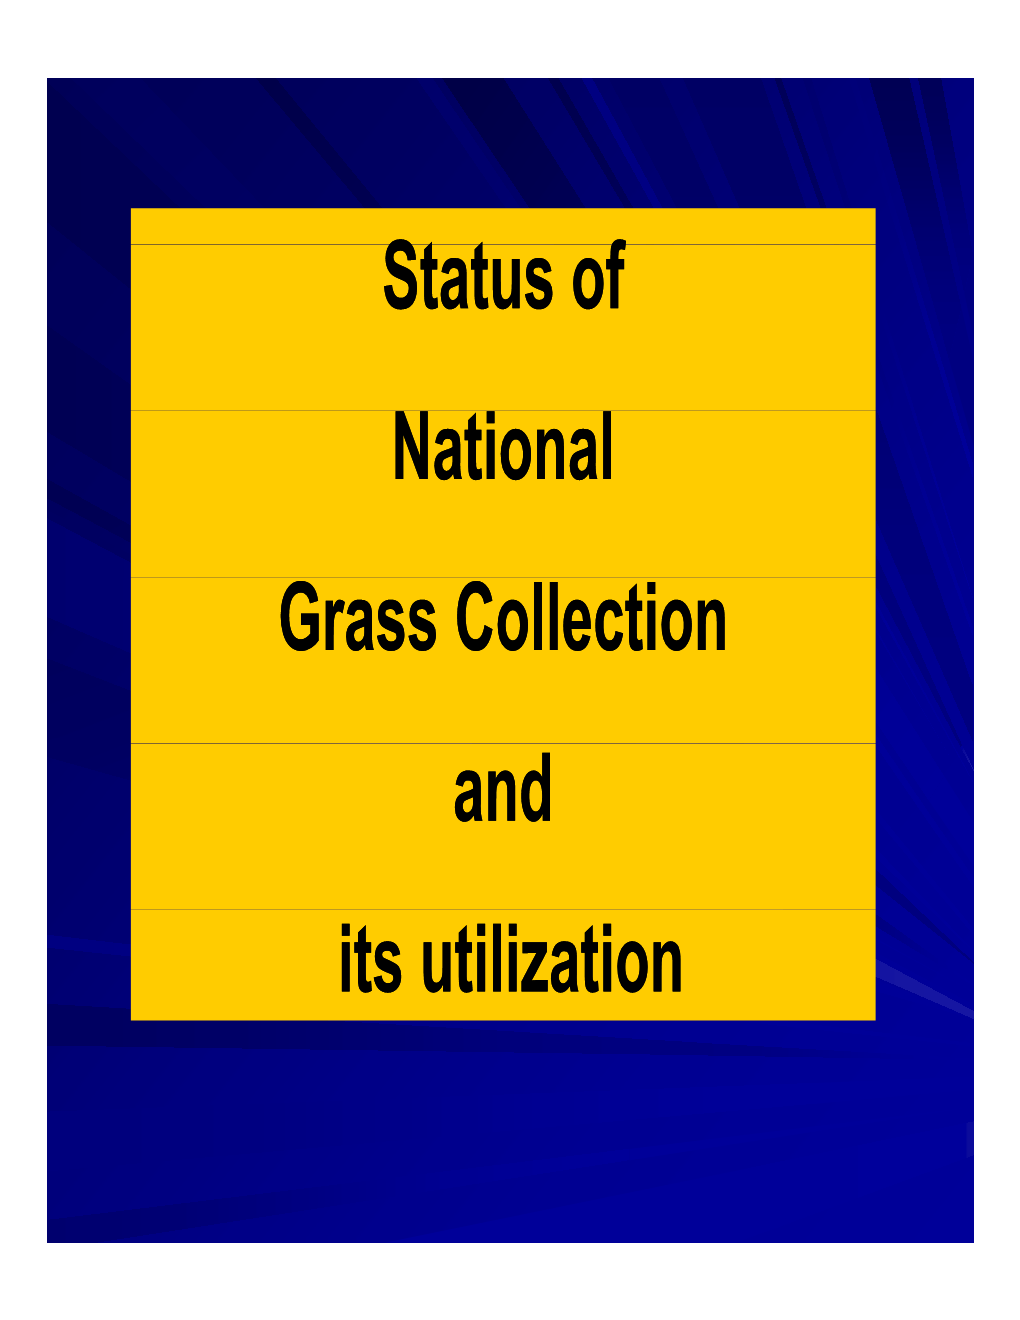 Is Grass Collection (Ecotypes of Pasture and Turf Grass Species, Ornamental and Wild Growing, Native and Foreign)